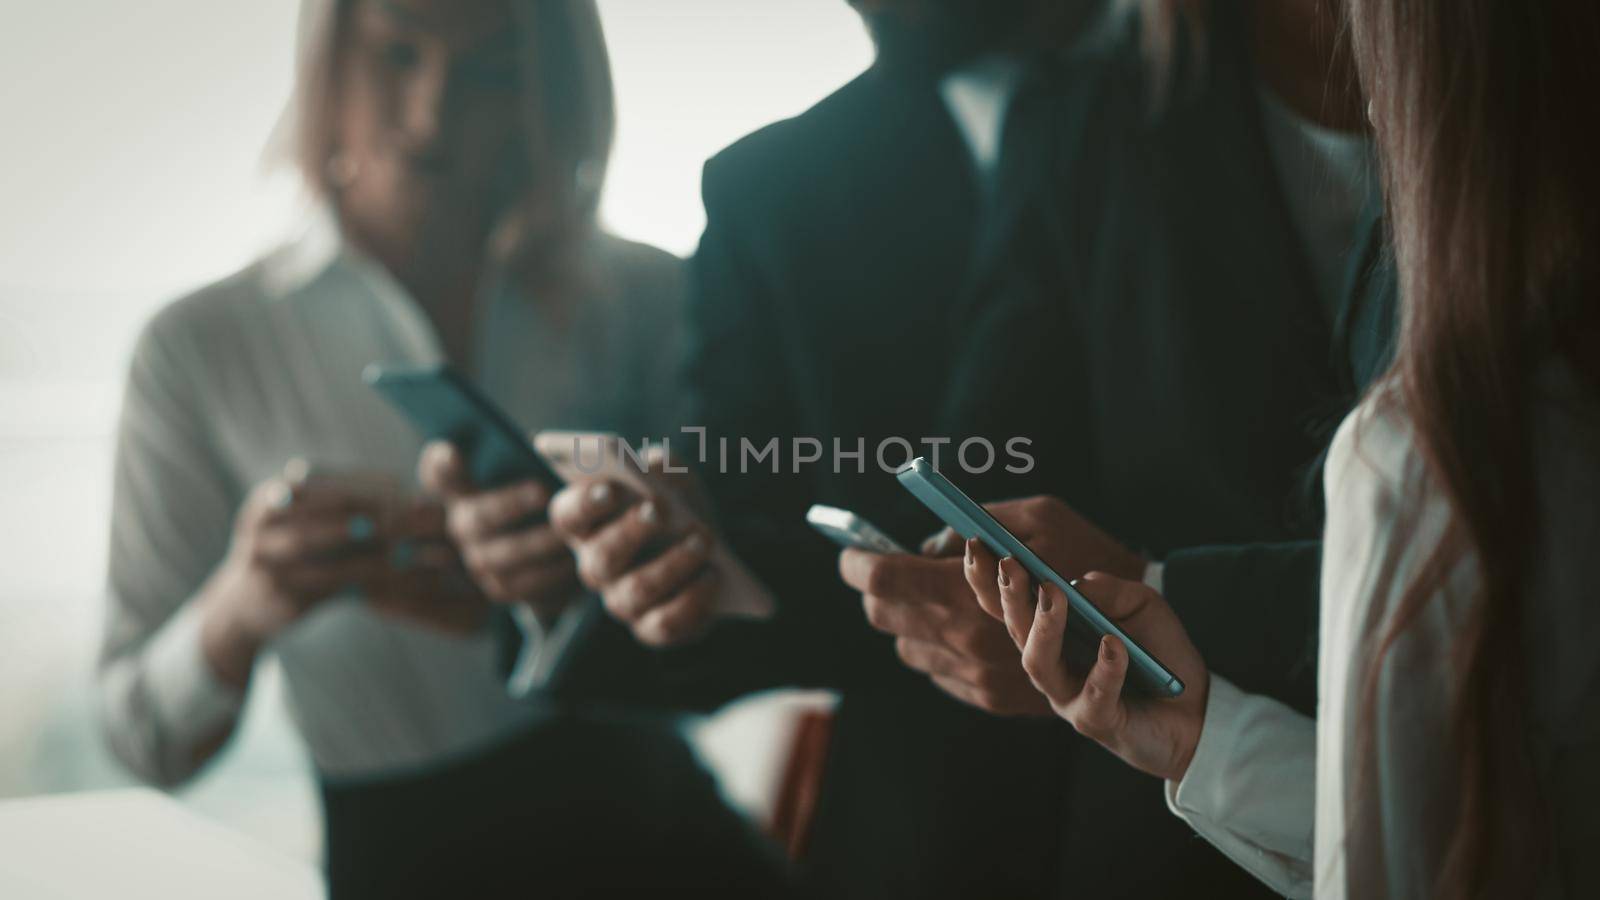 Business people using mobile phones together standing in office. Close up shot of human hands holding smartphones. Blurred image. Selective focus on female hand in foreground.